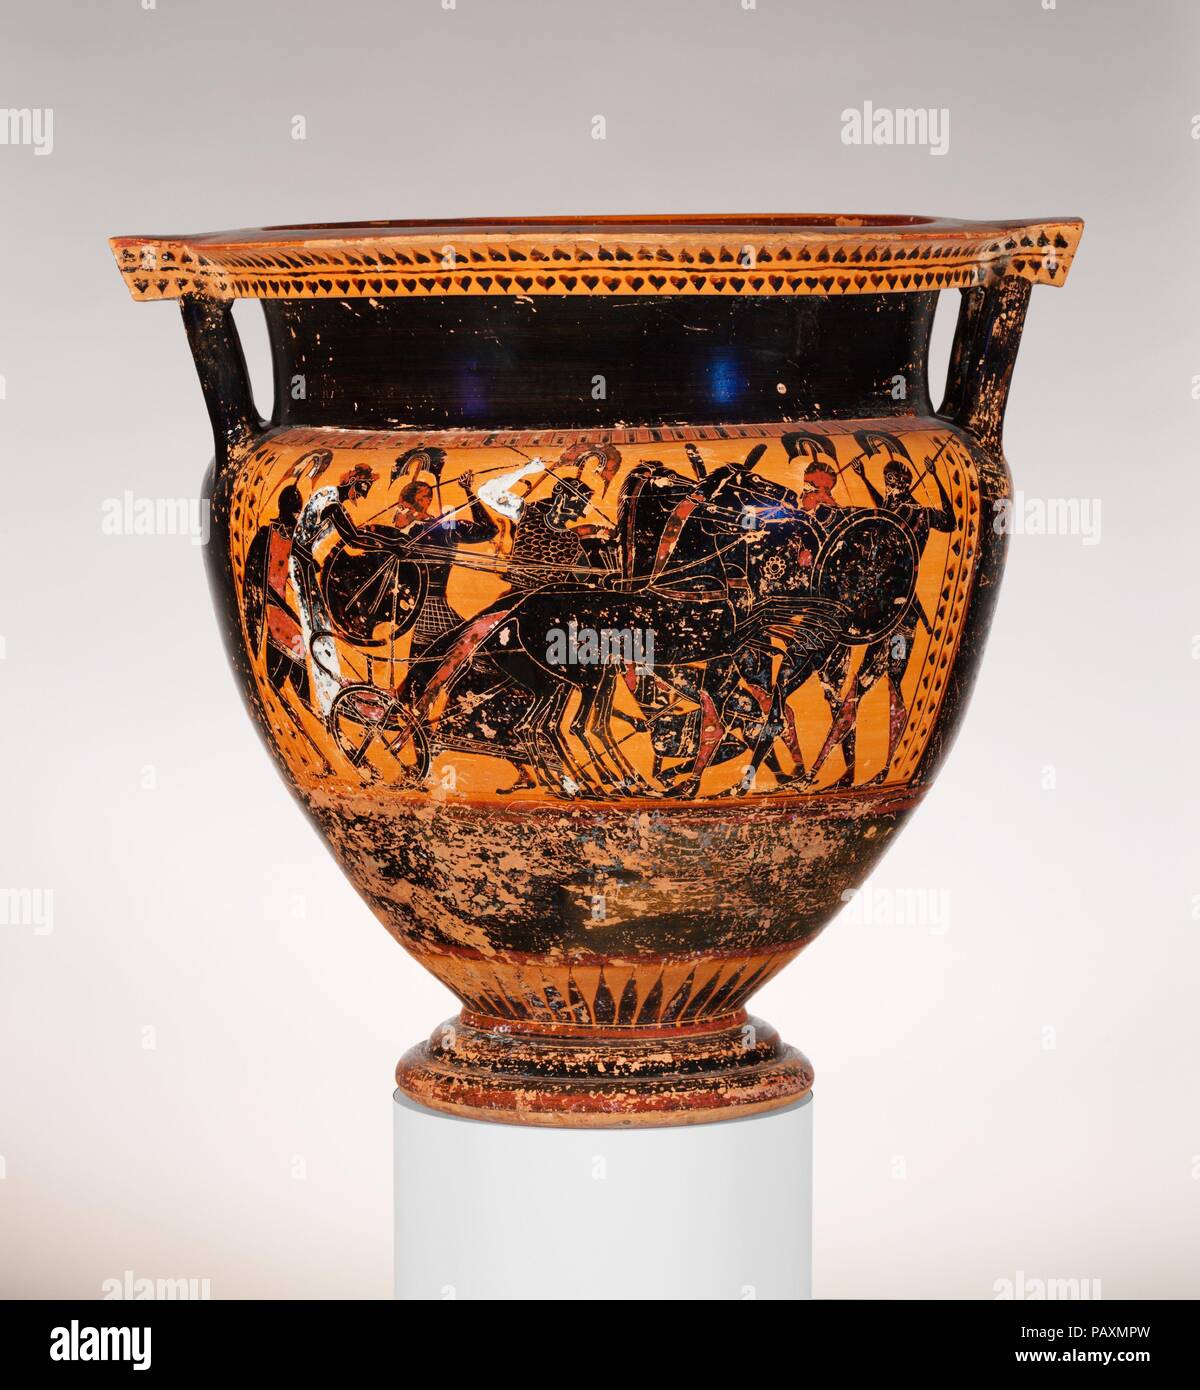 Terracotta column-krater (bowl for mixing wine and water). Culture: Greek,  Attic. Dimensions: H. 19 7/8 in. (50.5 cm) diameter of mouth 18 3/4 in.  (47.6 cm). Date: ca. 540 B.C.. Obverse, Gigantomachy (